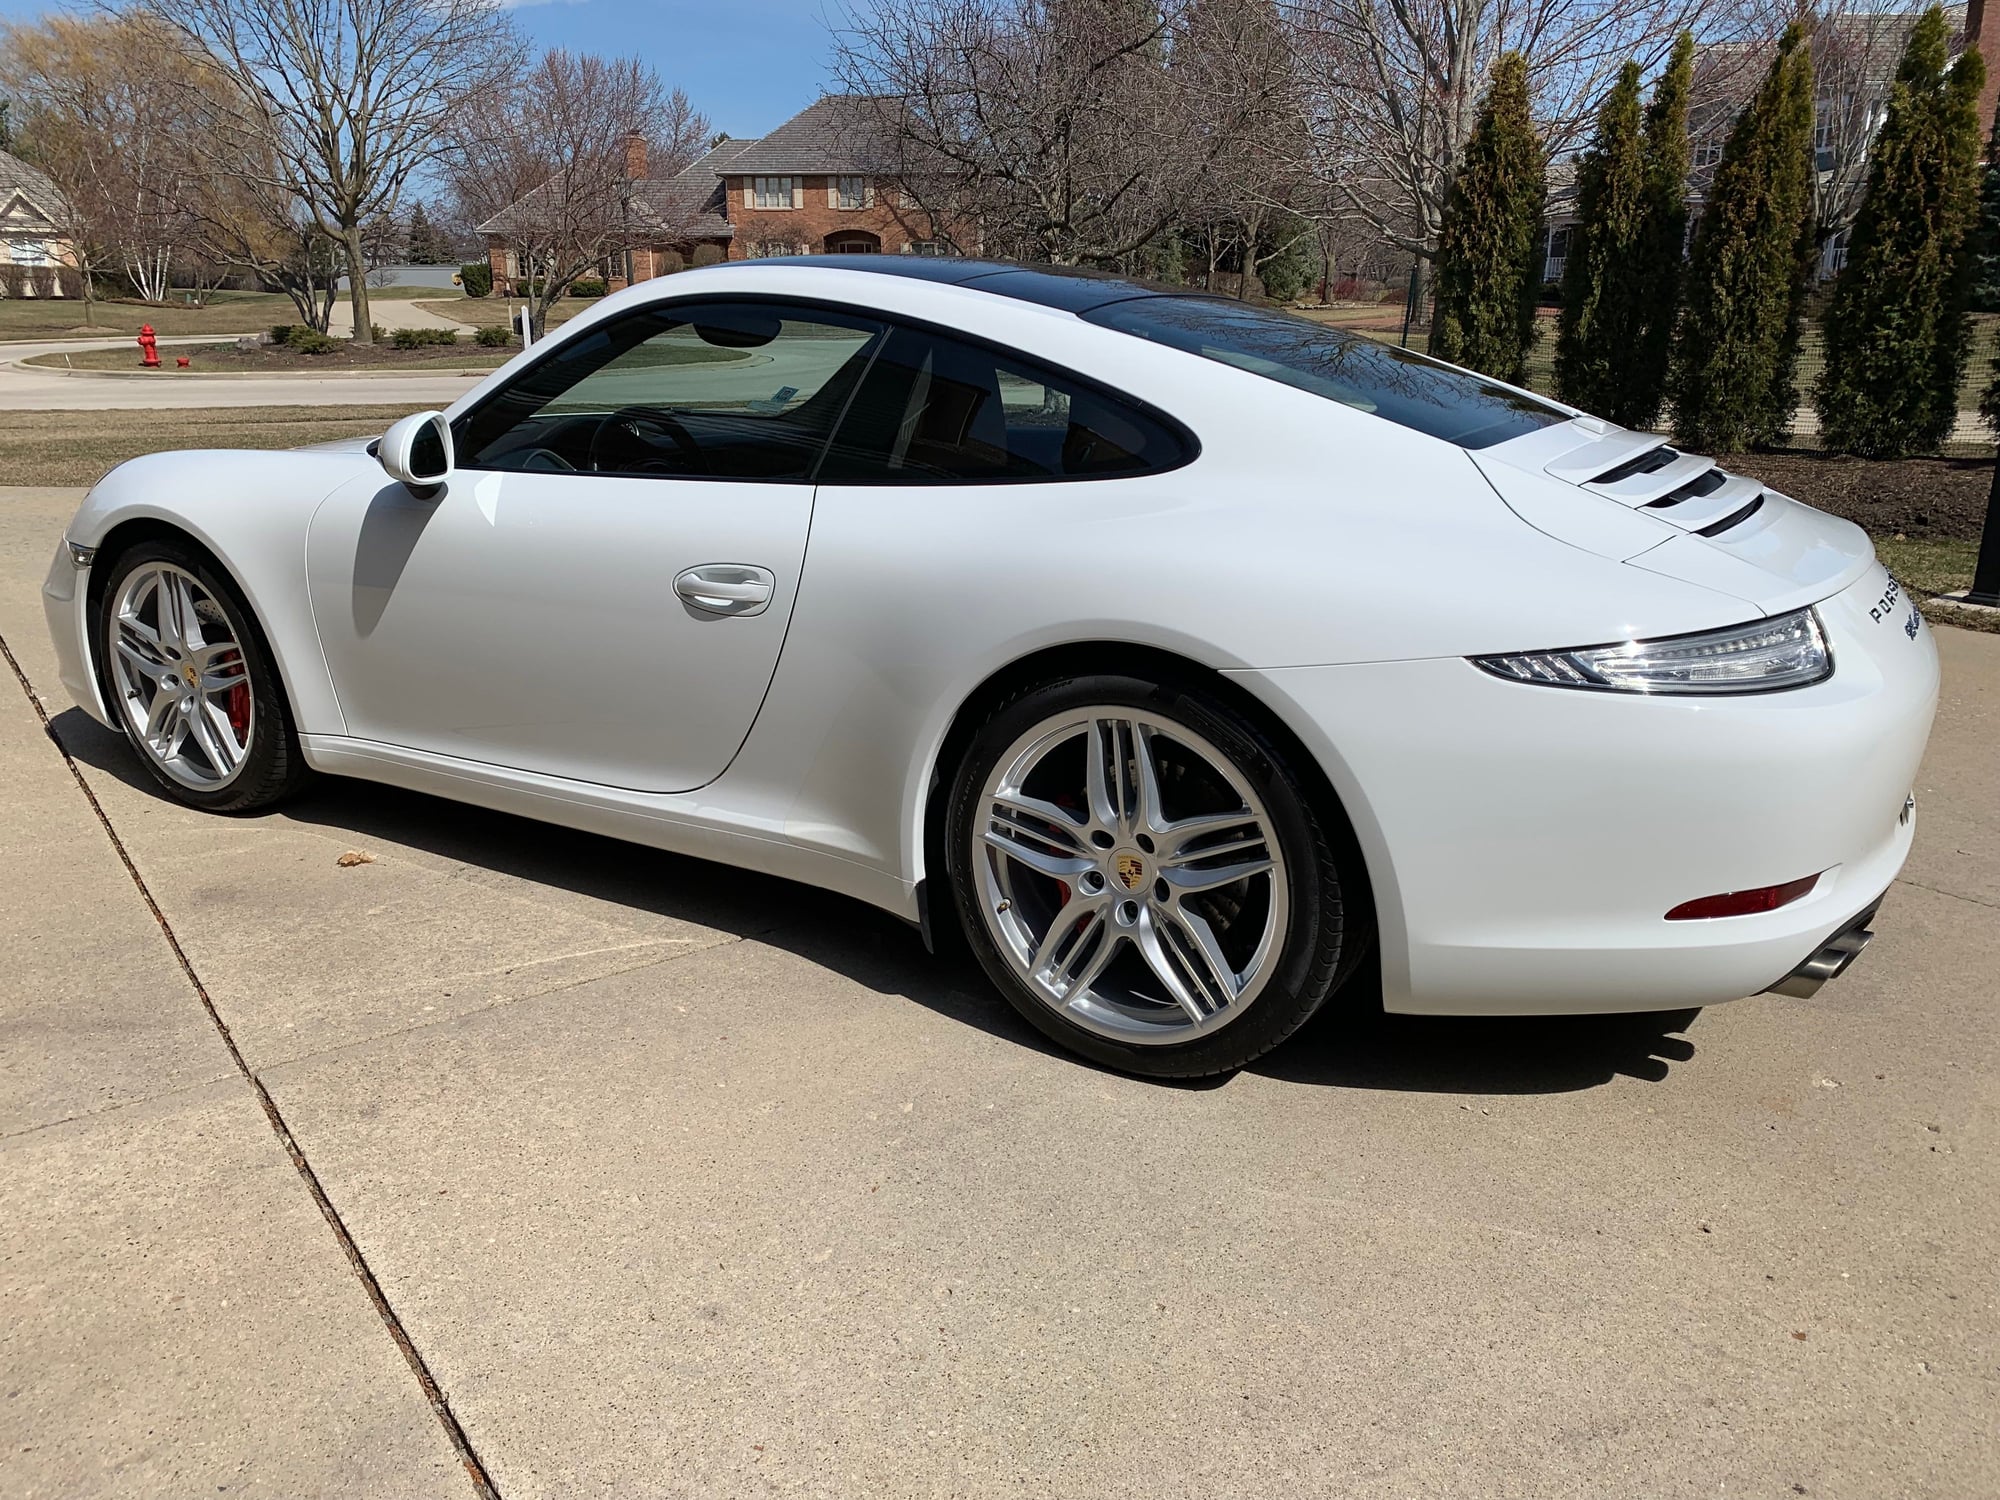 2014 Porsche 911 - 2014 Porsche 911 Carrera S - Too nice to Trade In! - 10k miles - CPO - MSRP $122k - Used - VIN WP0AB2A98ES120907 - 10,053 Miles - 6 cyl - 2WD - Automatic - Coupe - White - Libertyville, IL 60048, United States